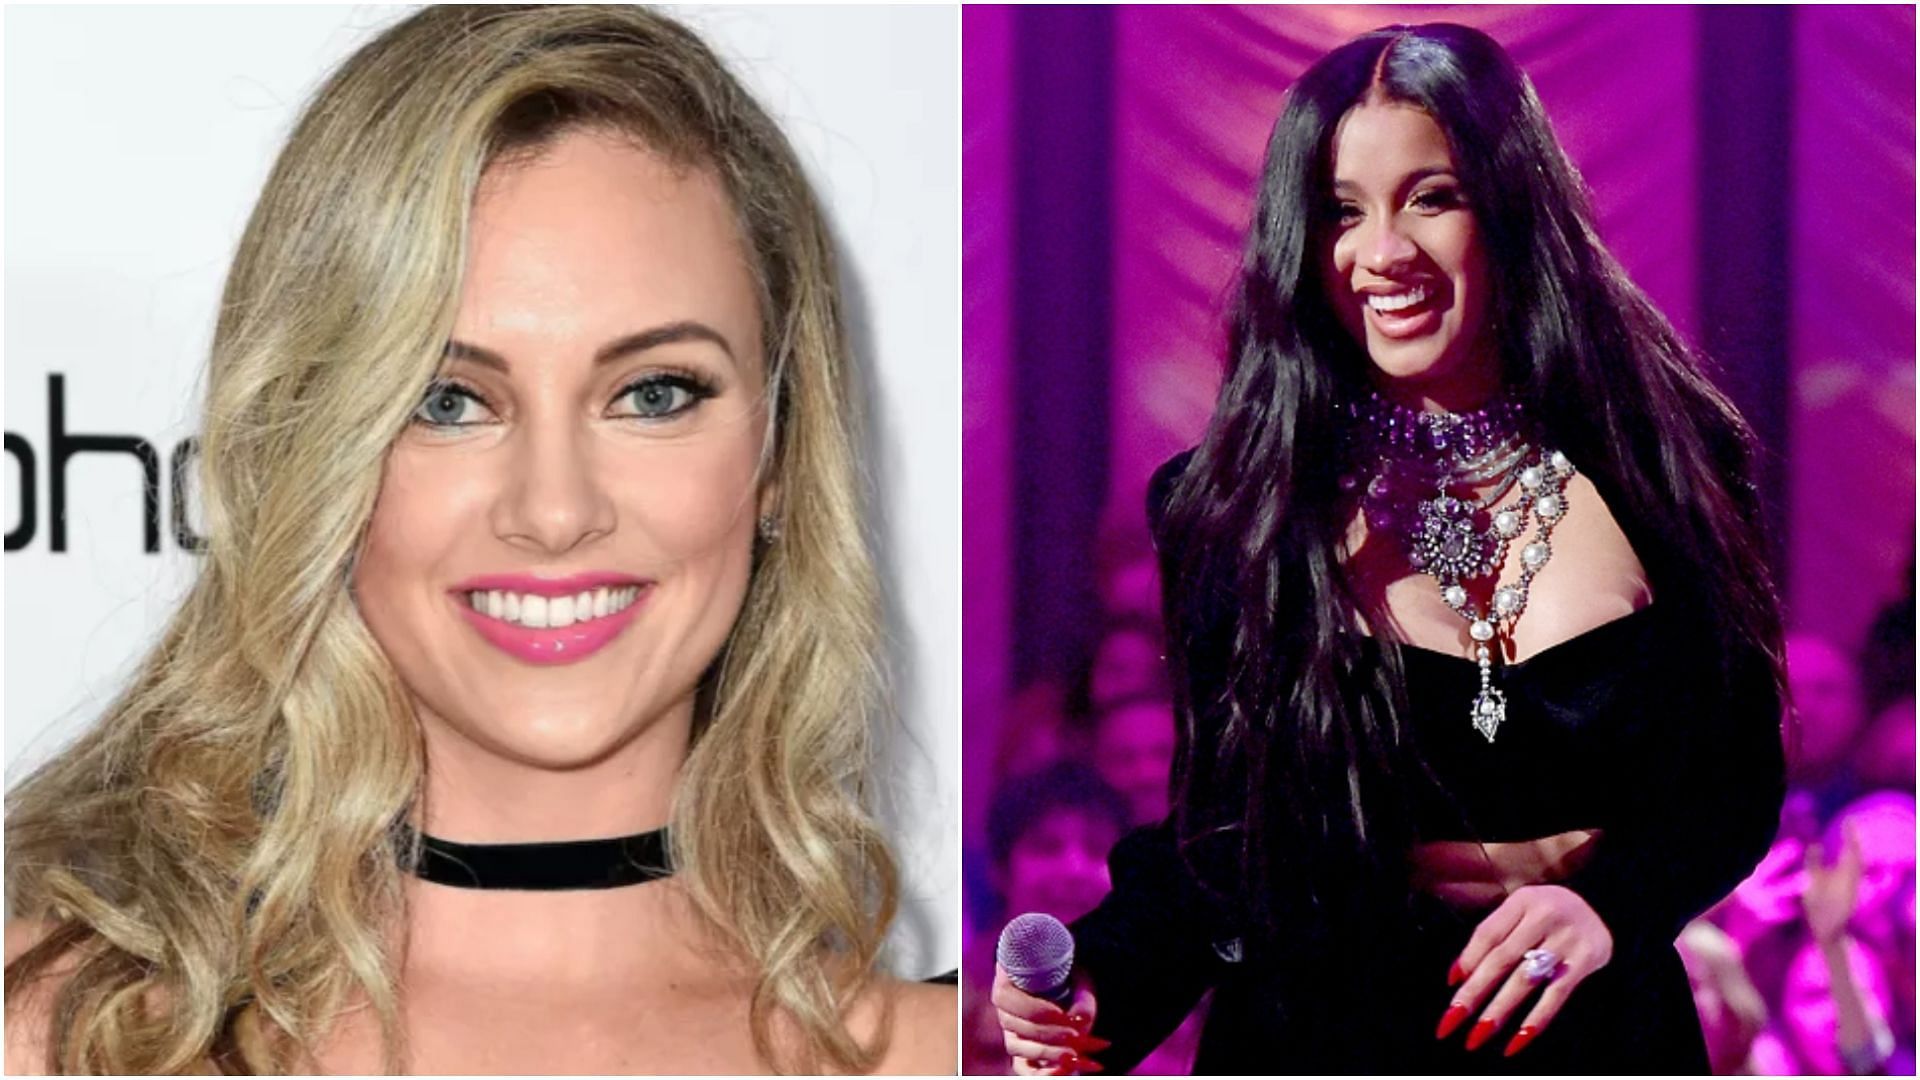 Cardi B and Nicole Arbour were caught in an online feud. (Images via Getty)